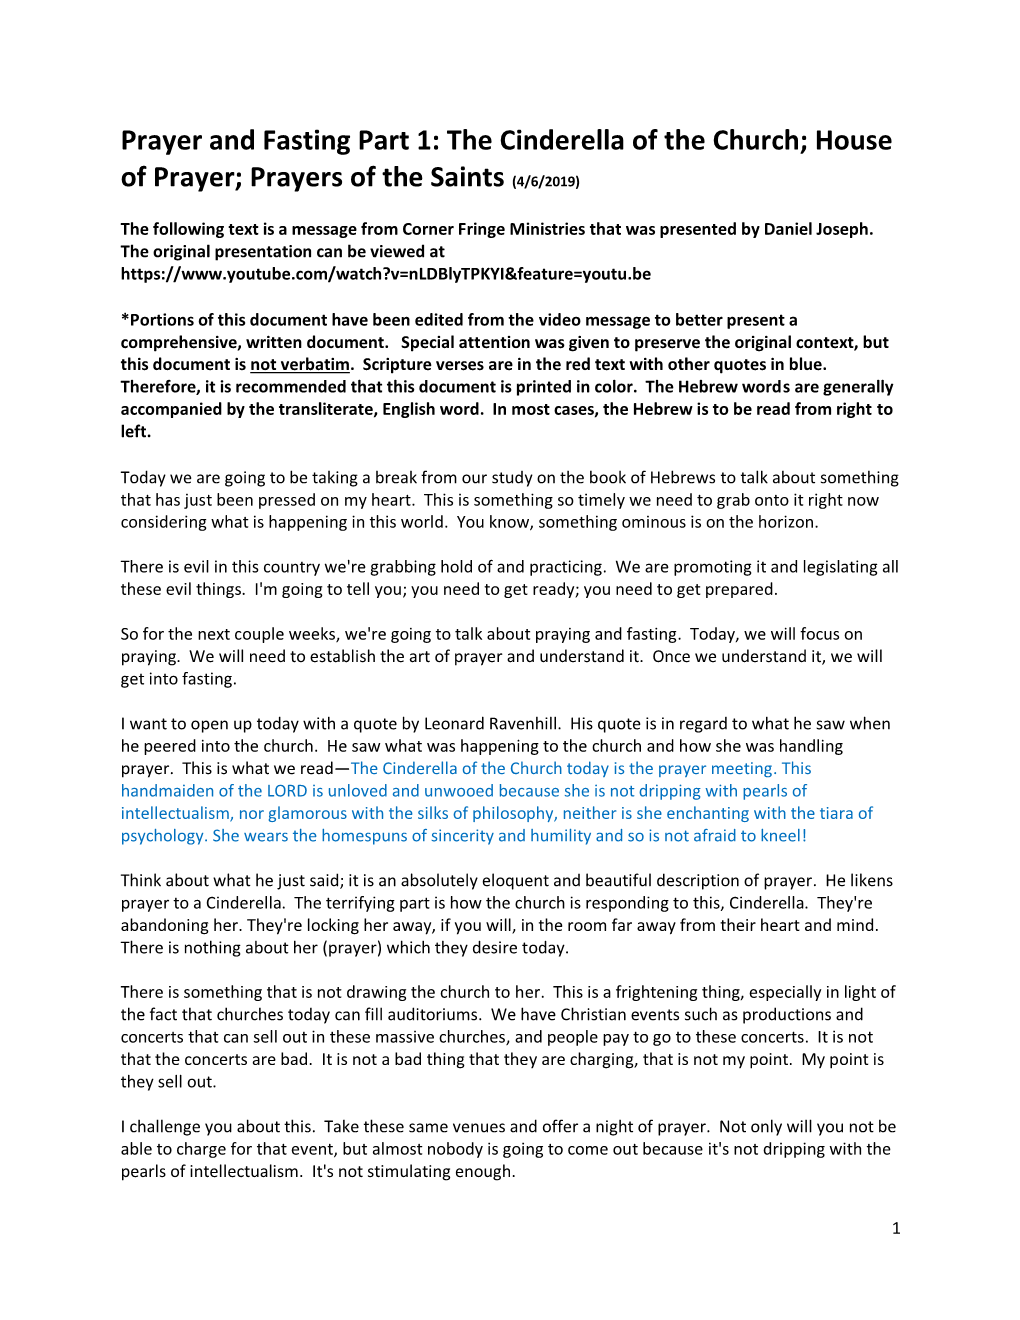 Prayer and Fasting Part 1: the Cinderella of the Church; House of Prayer; Prayers of the Saints (4/6/2019)